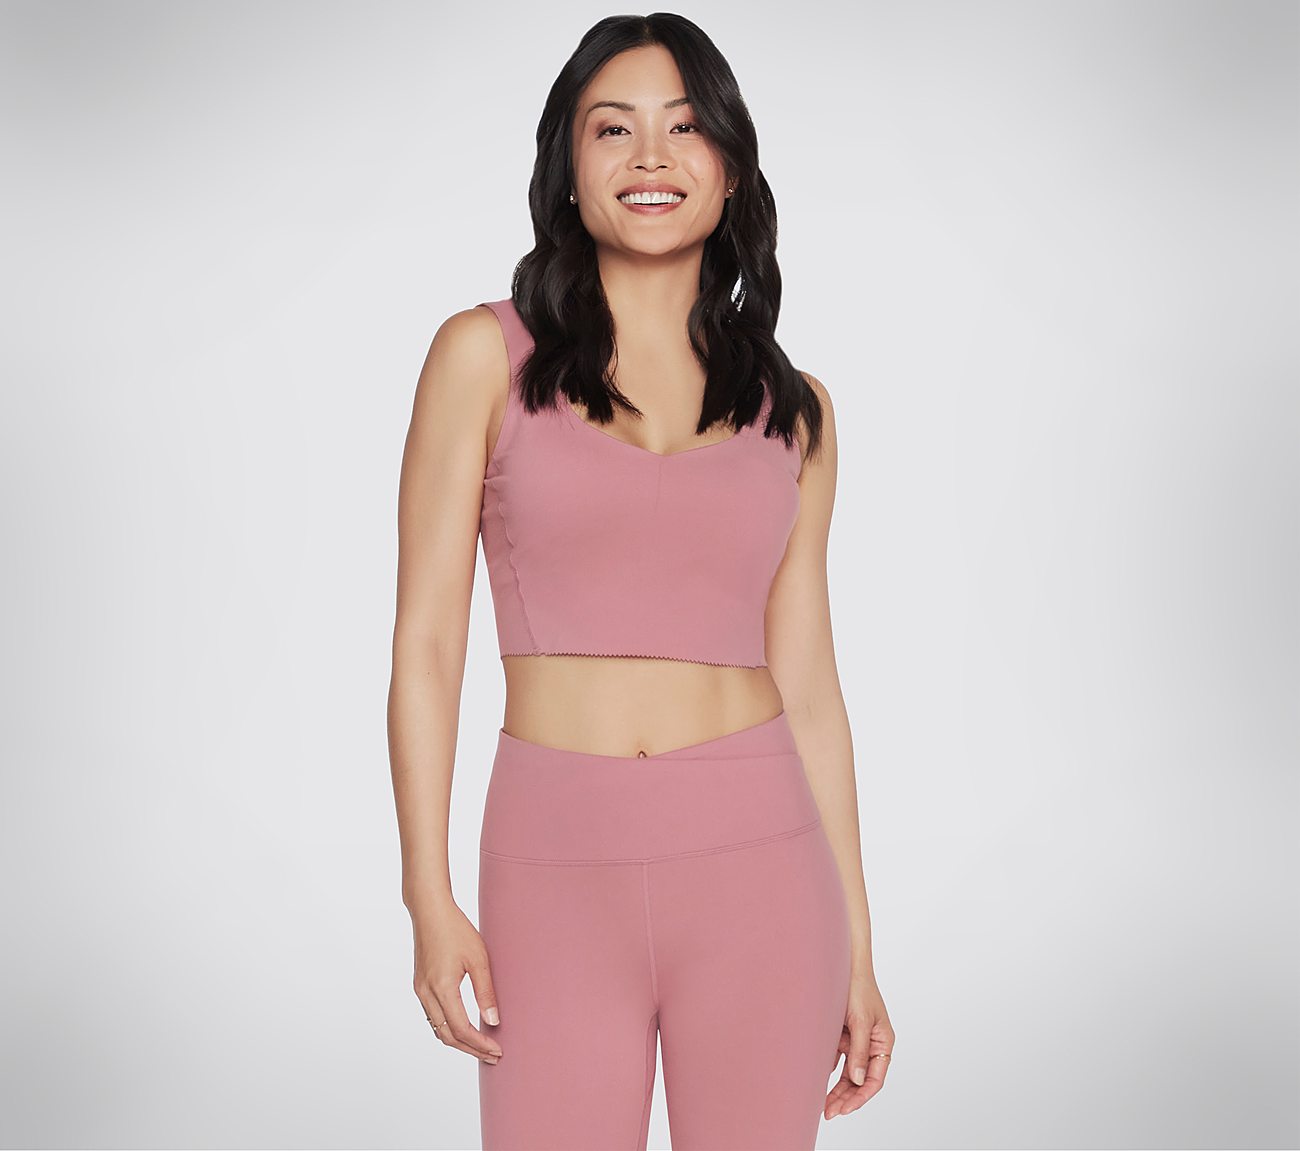 GOSCULPT SCALLOPED LONG LINE, MMAUVE Apparels Lateral View